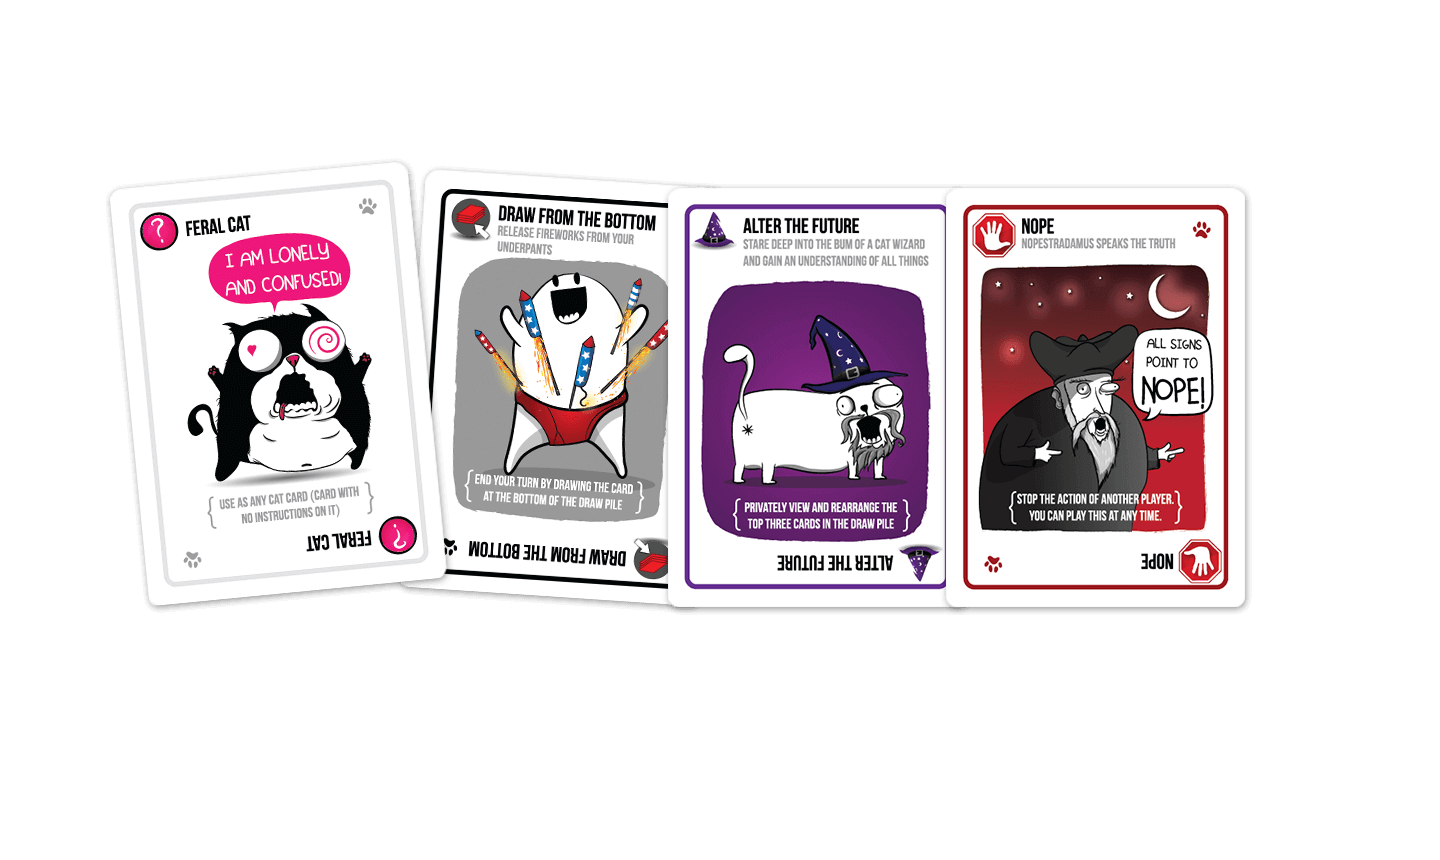 Exploding Kittens: Party Pack Edition